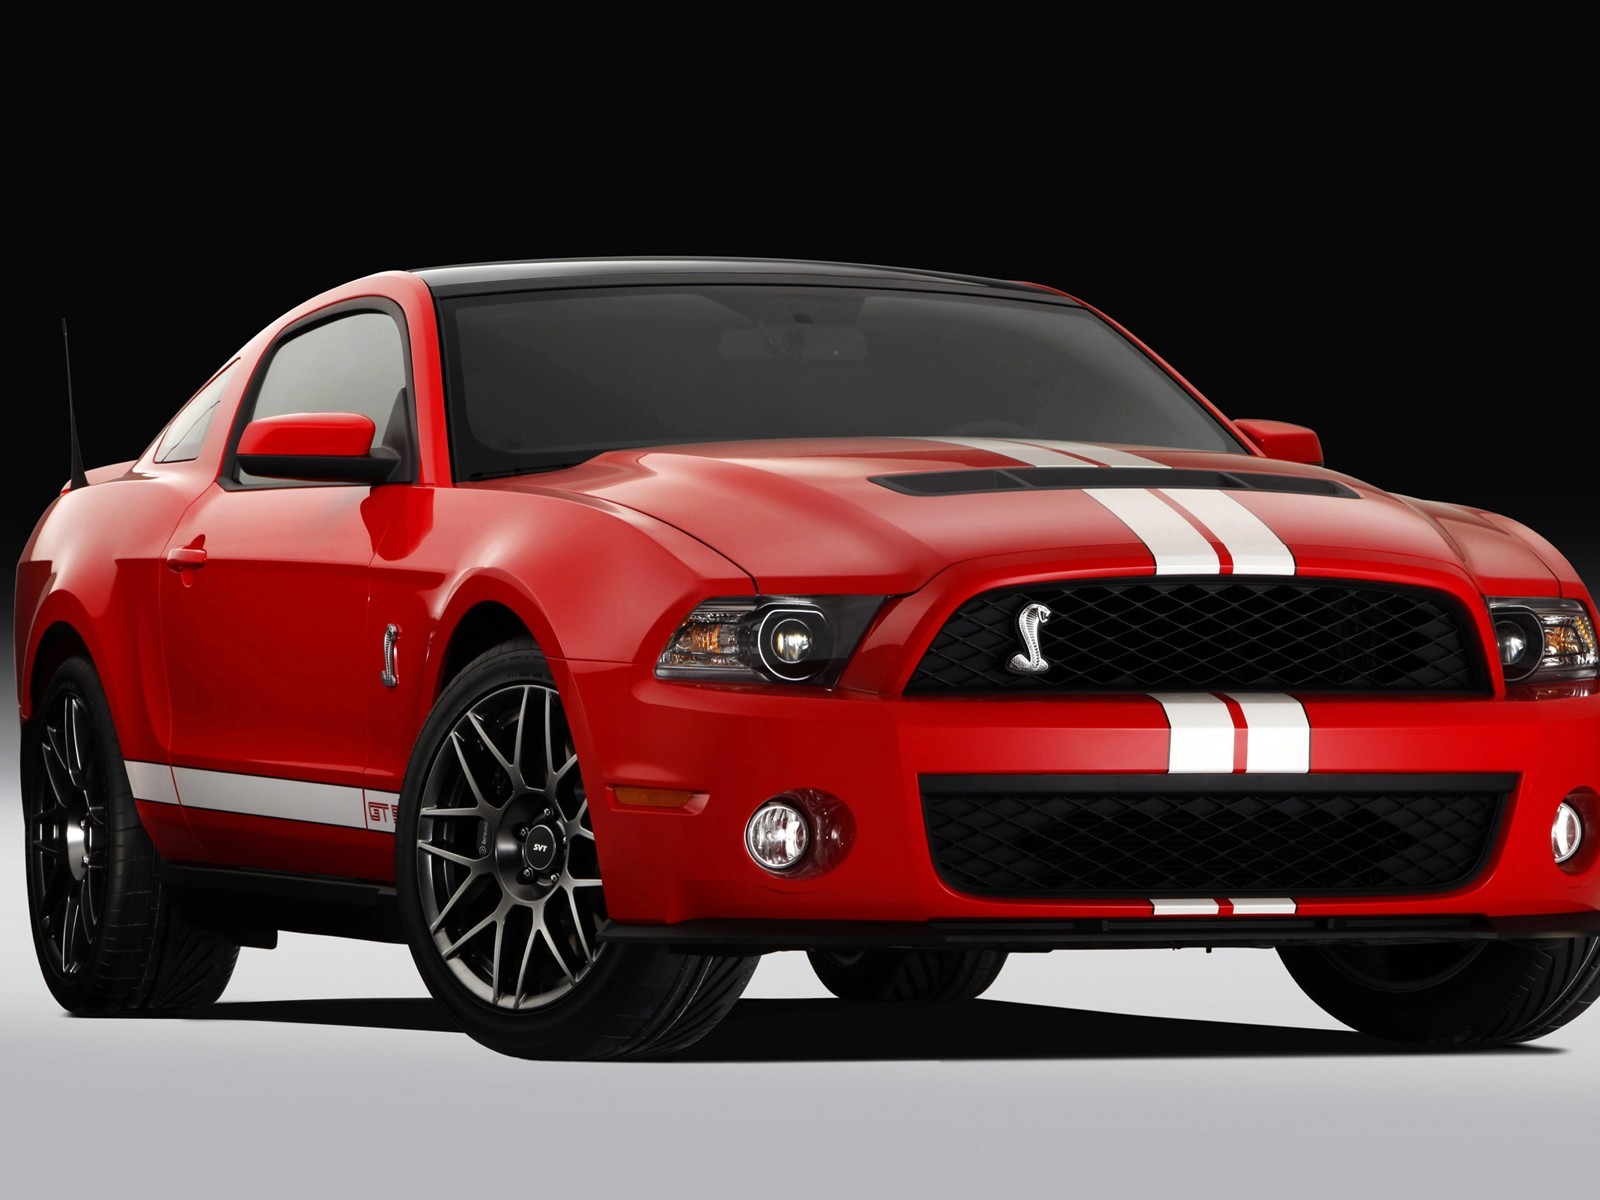 Ford Mustang GT500 Wallpapers #1 - 1600x1200